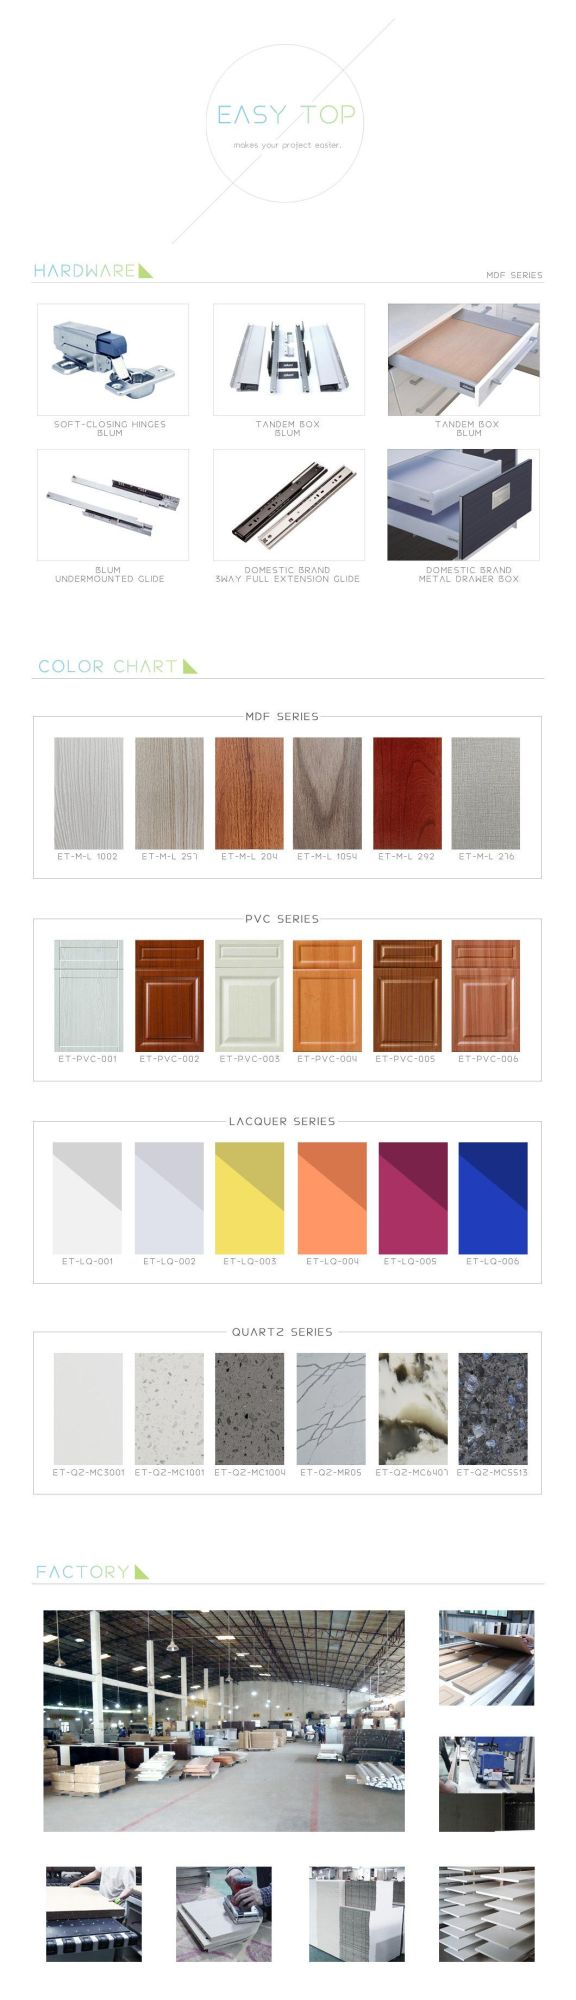 North American Style Modular Wood Kitchen Cabinets Cupboard Carving Door Storage Furniture